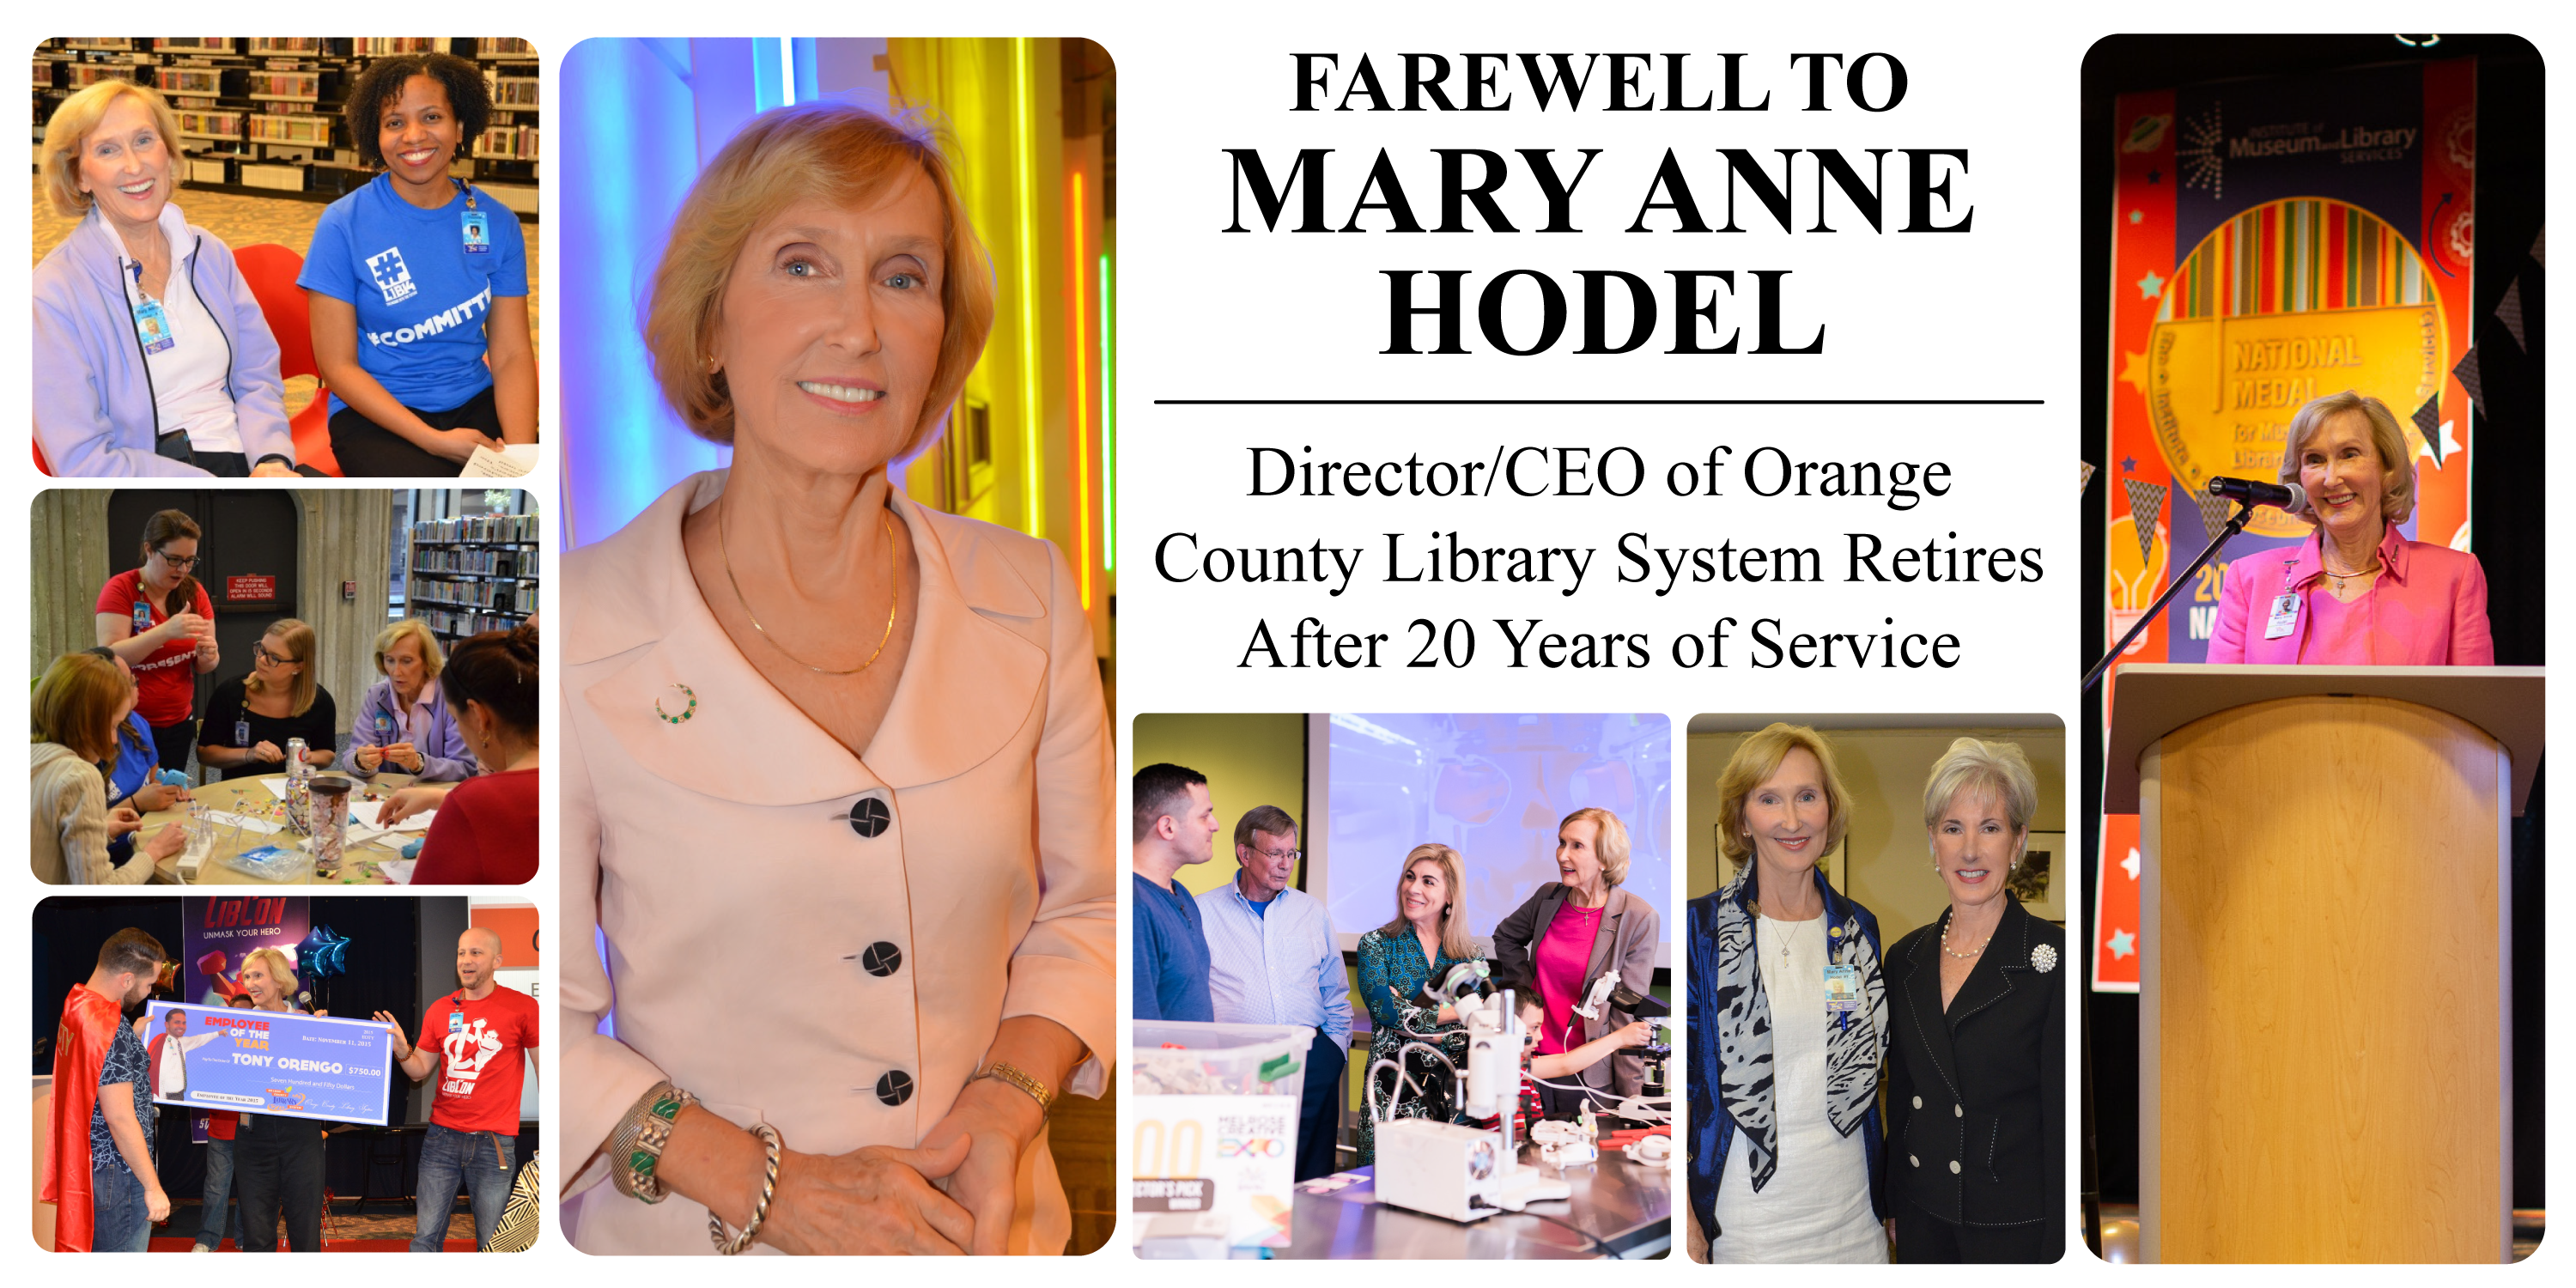 Farewell to Mary Anne Hodel - Director/CEO of Orange County Library System Retires After 20 Years of Service